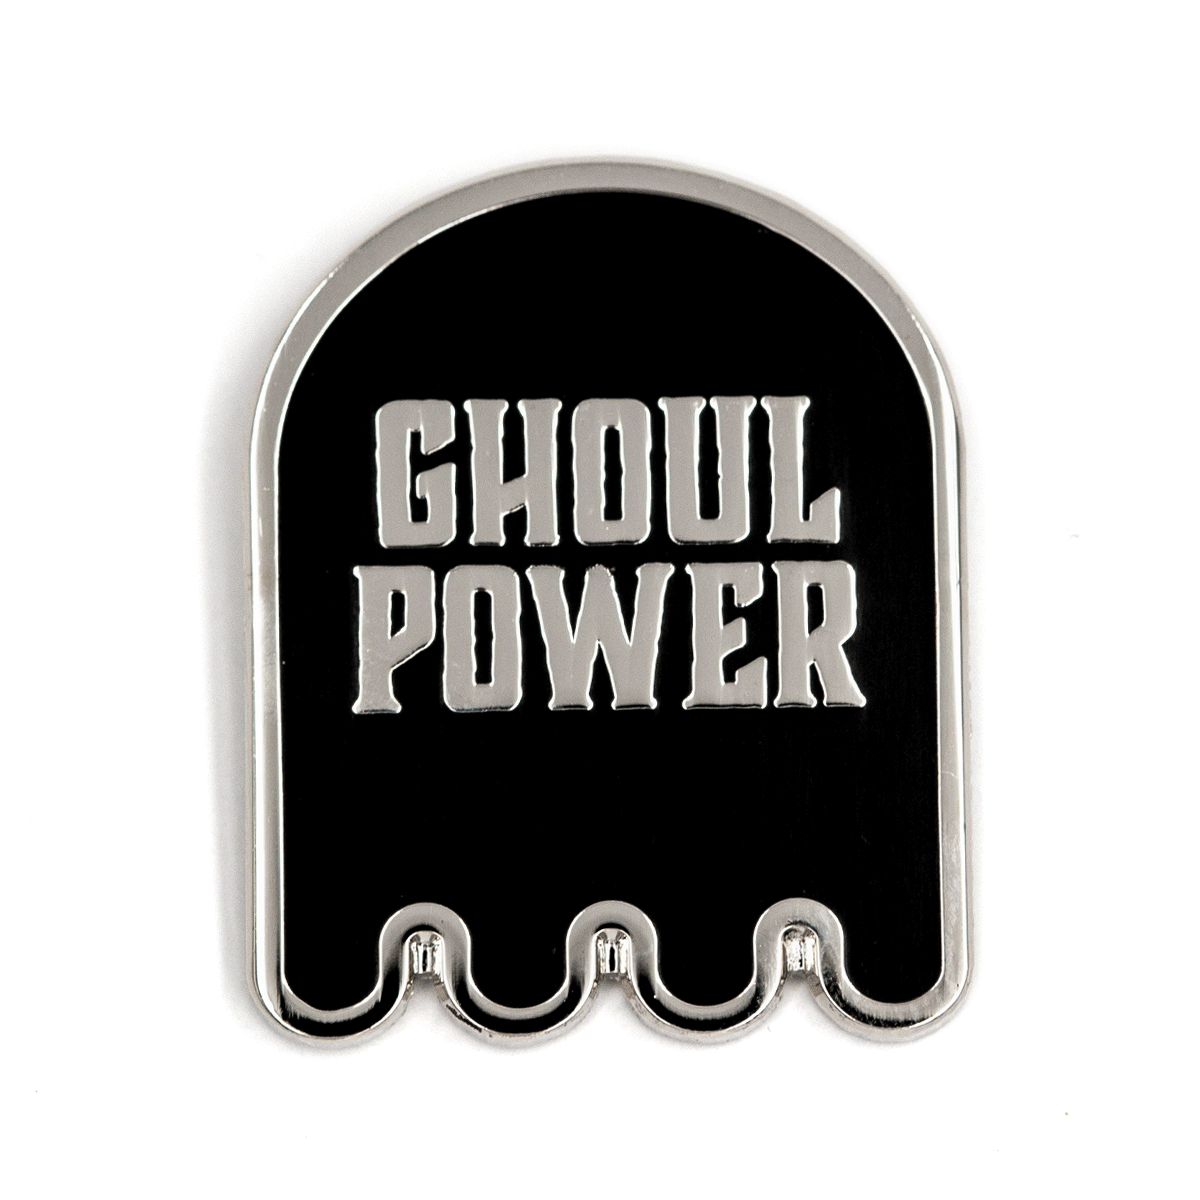 These Are Things - Ghoul Power